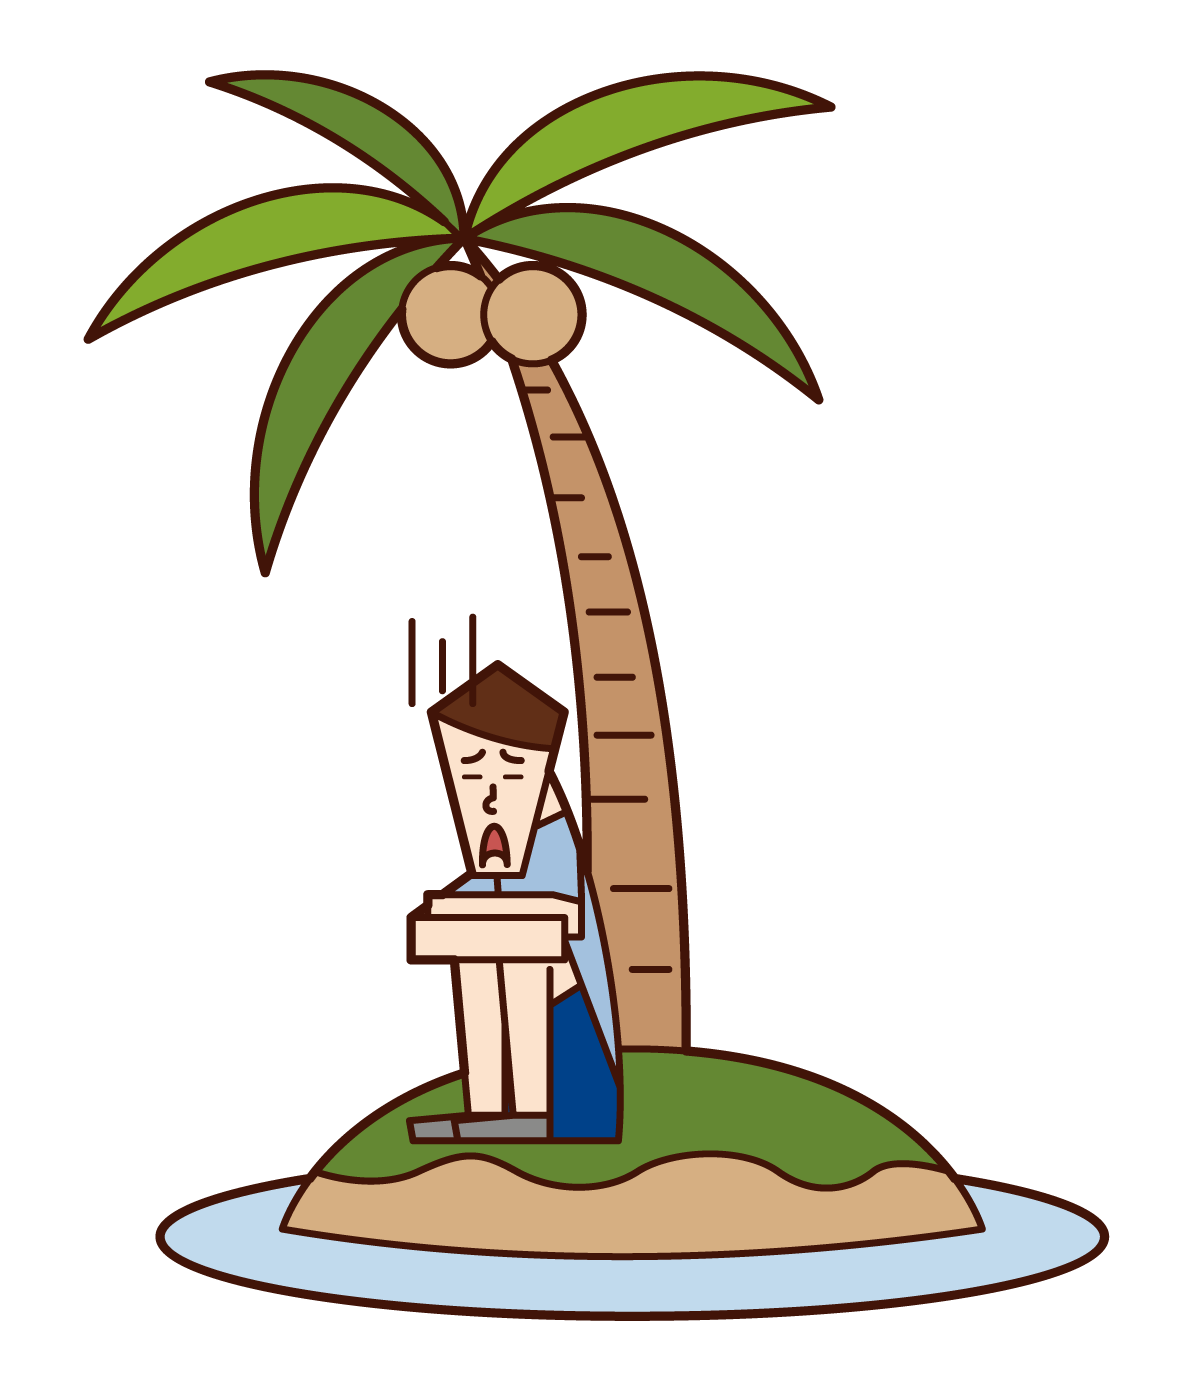 Illustration of a man who arrived at a deserted island in distress